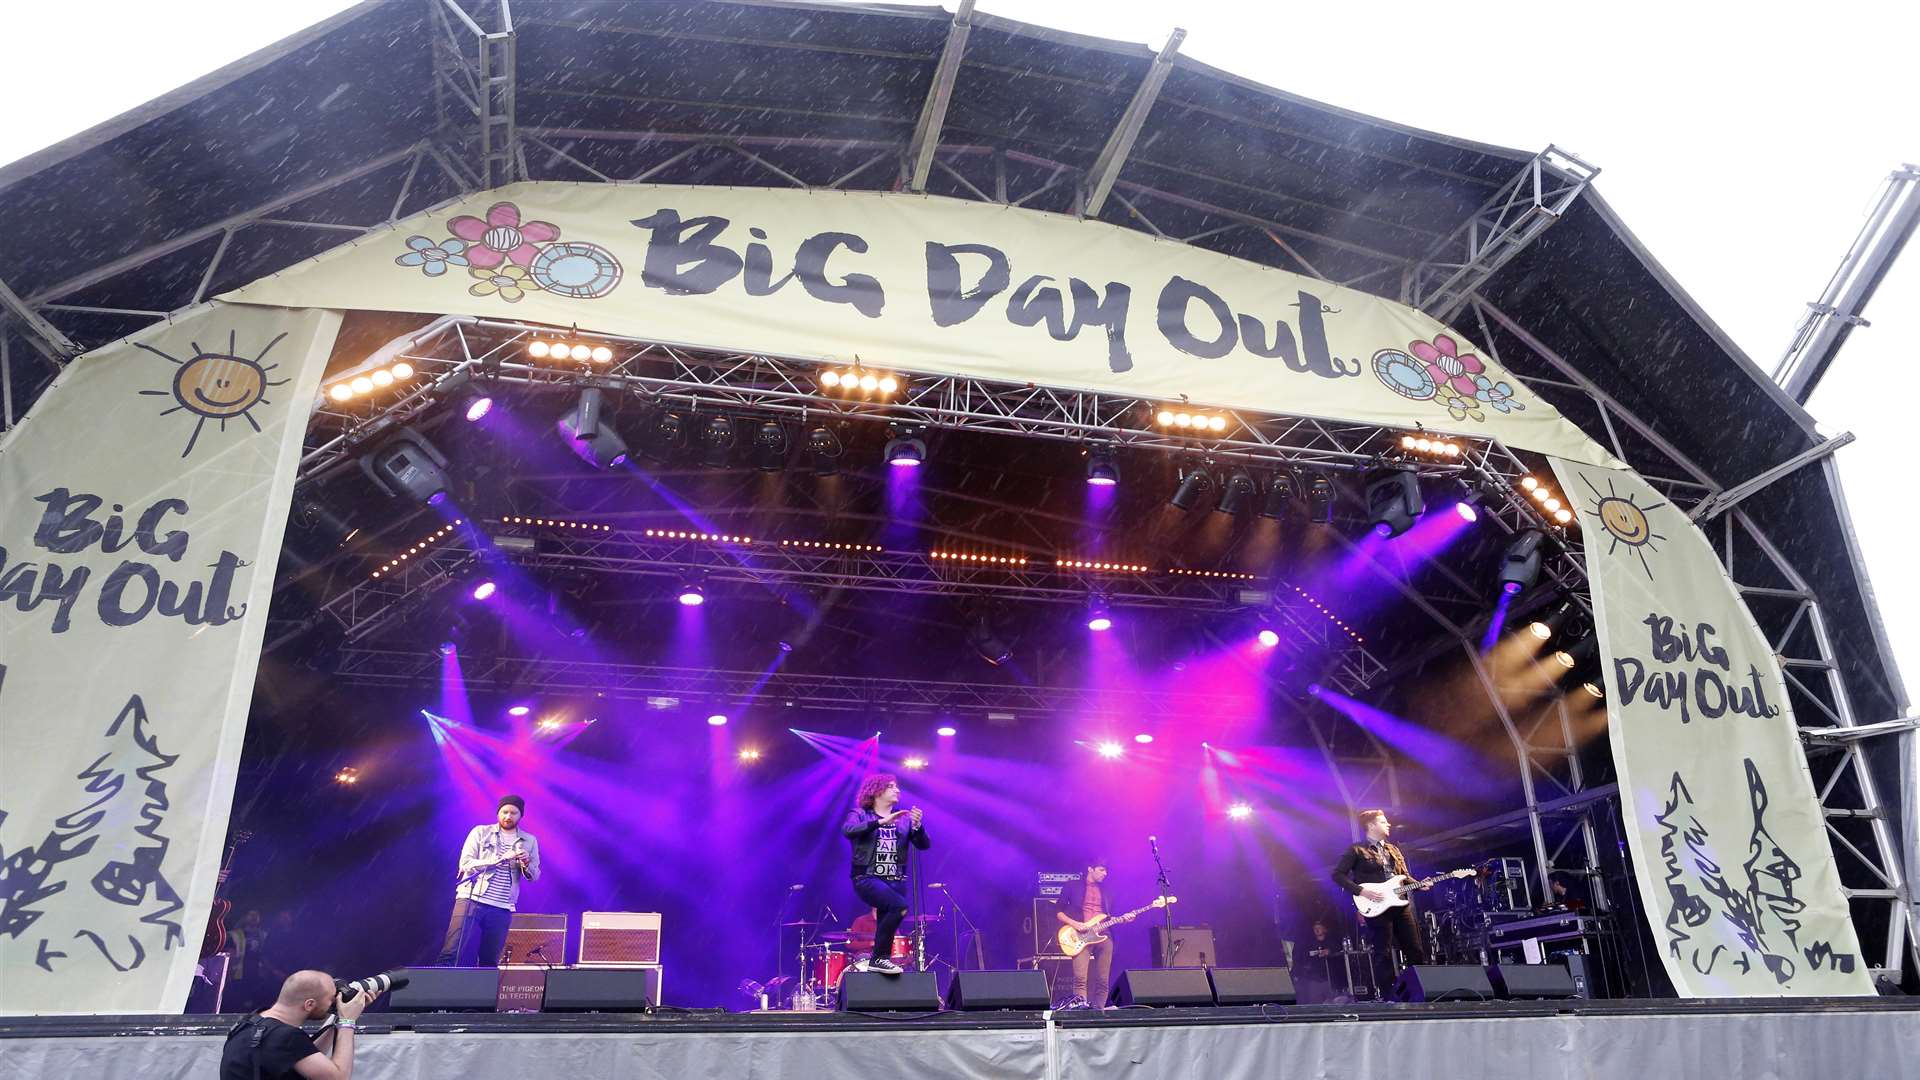 Bands performing at Big Day Out in Mote Park last year